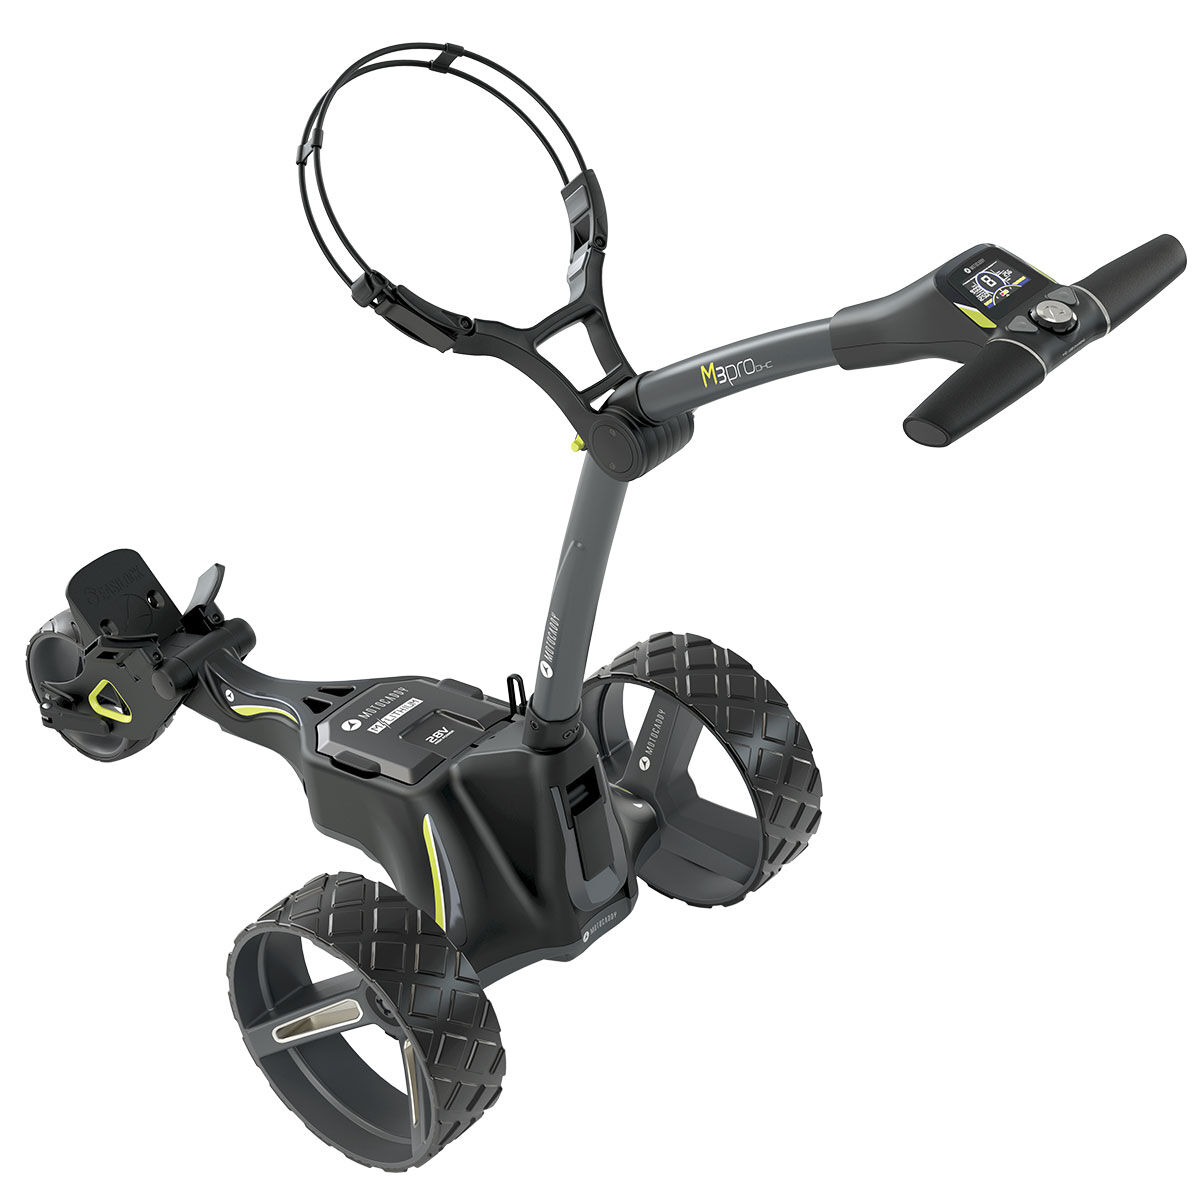 Motocaddy M3 Pro DHC Extended Range Lithium Electric Golf Trolley (with Accessories), 36 hole battery, Graphite, 650x470x410mm | American Golf von Motocaddy